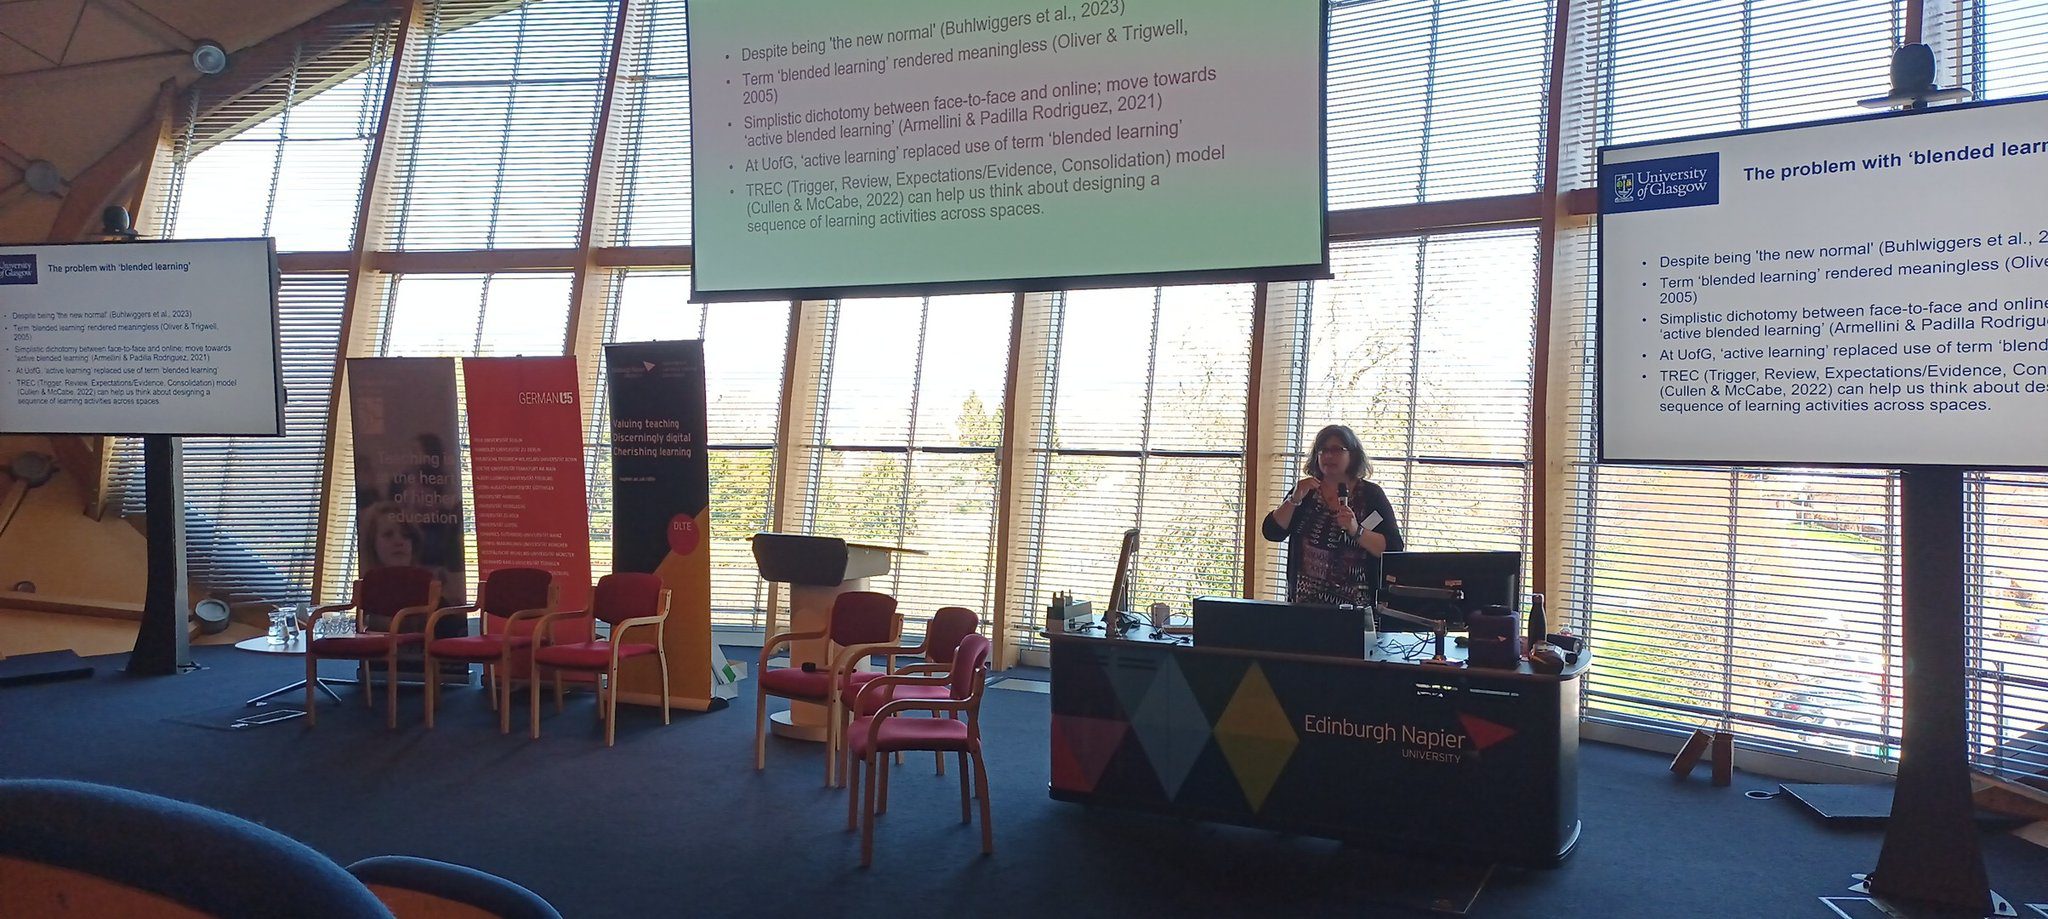 Dr Vicki Dale talking about "The Problem with 'Blended Learning'". The slide onscreen has 5 bullet points. 1: Despite being 'the new normal' (Buhlwiggers et al., 2023) 2: the term 'blended learning' is rendered meaningless (Oliver & Trigwell, 2005). 3: It is a simplistic dichotomy between face to face and online; move towards 'active blended learning' (Armellini & Padilla Rodriguez, 2021). 4: At University of Glasgow, 'active learning' replaced use of the term 'blended learning'. 5: TREC (Trigger, Review, Expecations/Evidence, Consolidation) model (Cullen & McCabe, 2022) can help us think about designing a sequence of learning activities across spaces.